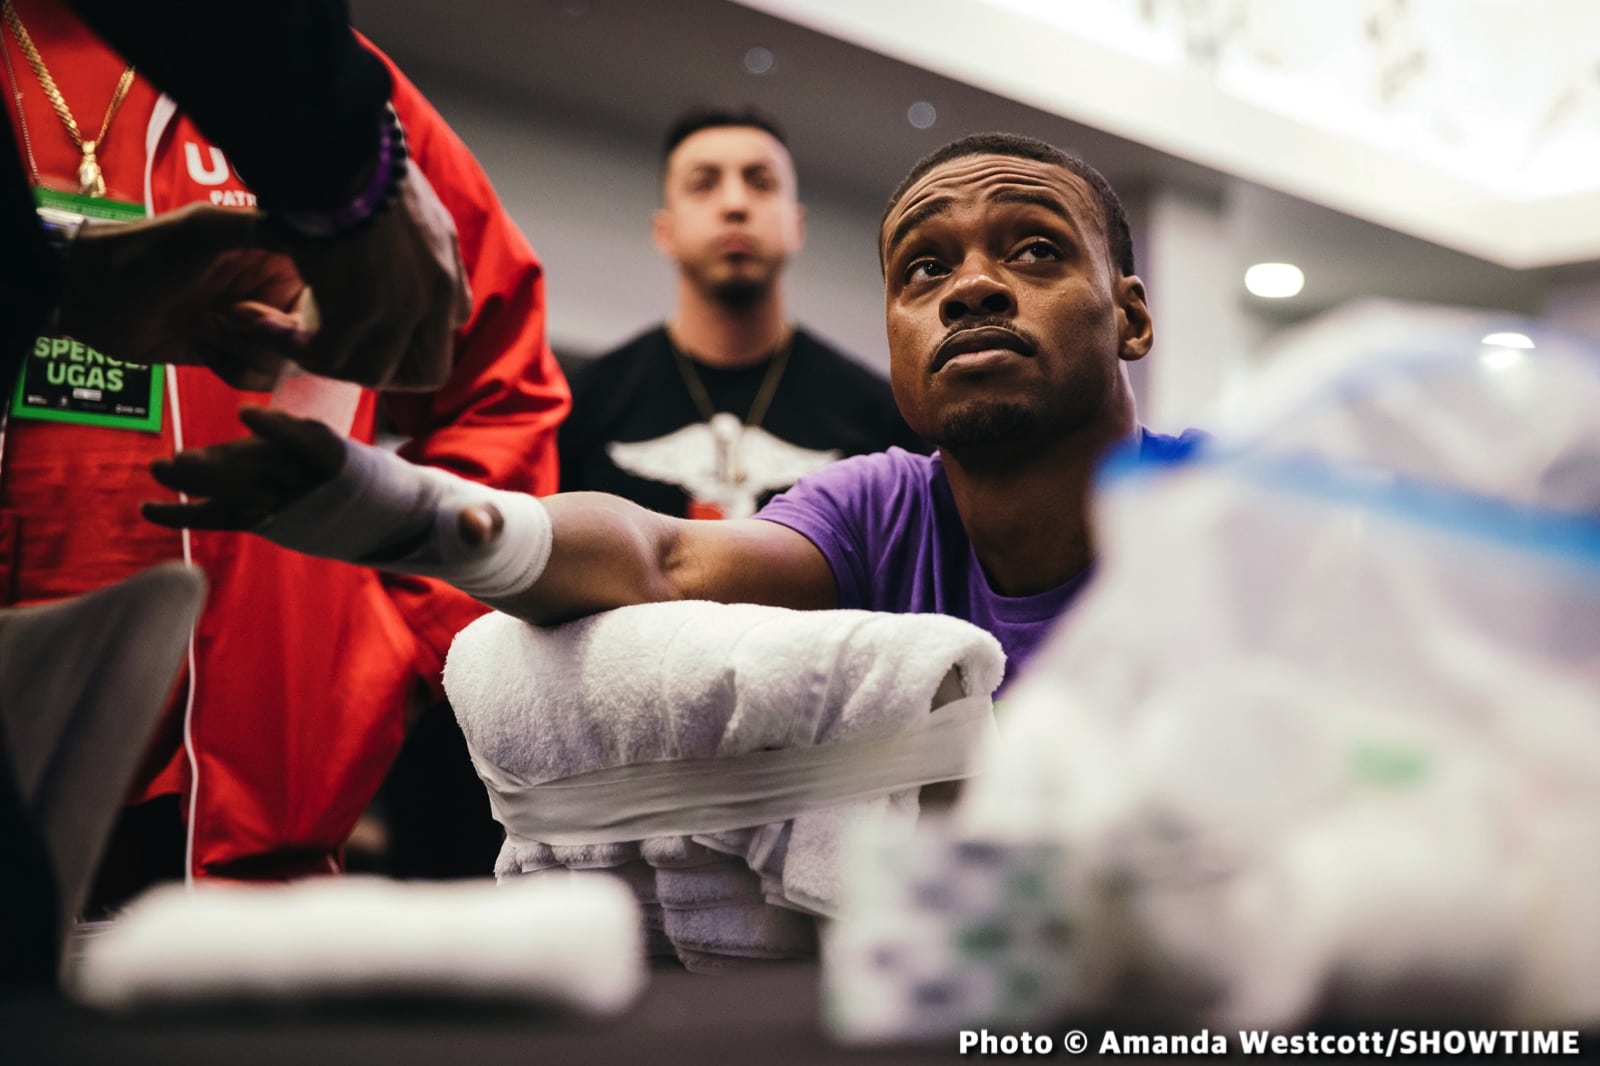 Image: Errol Spence shouldn't return to 147 after fighting Thurman at 154 says Bozy Ennis